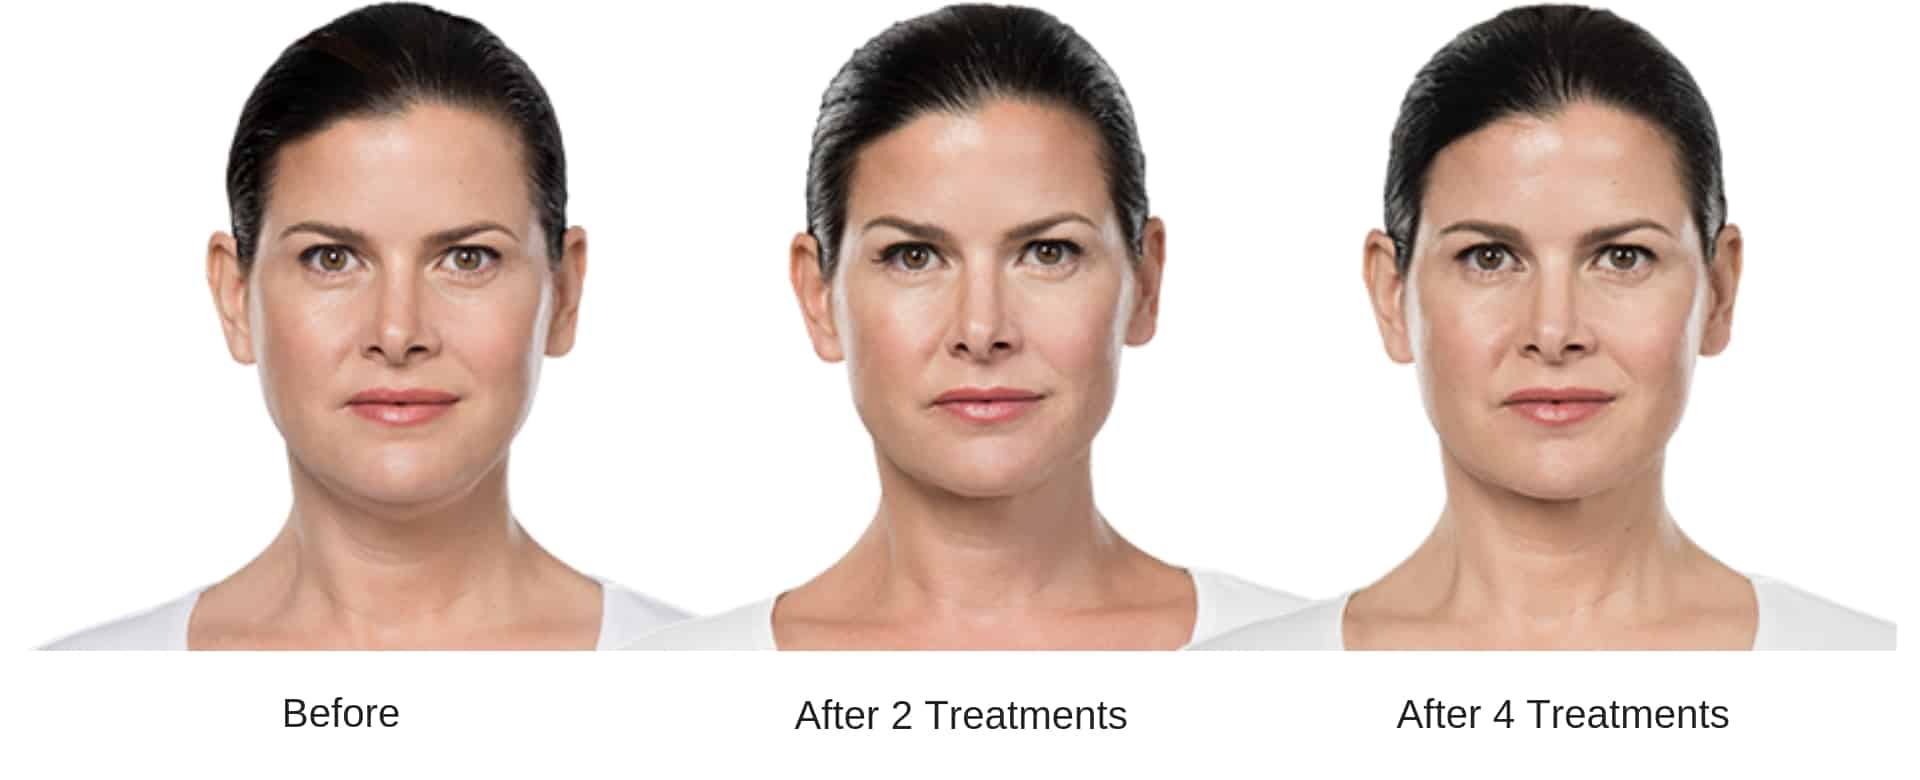 Woman's before and after Kybella treatment results.